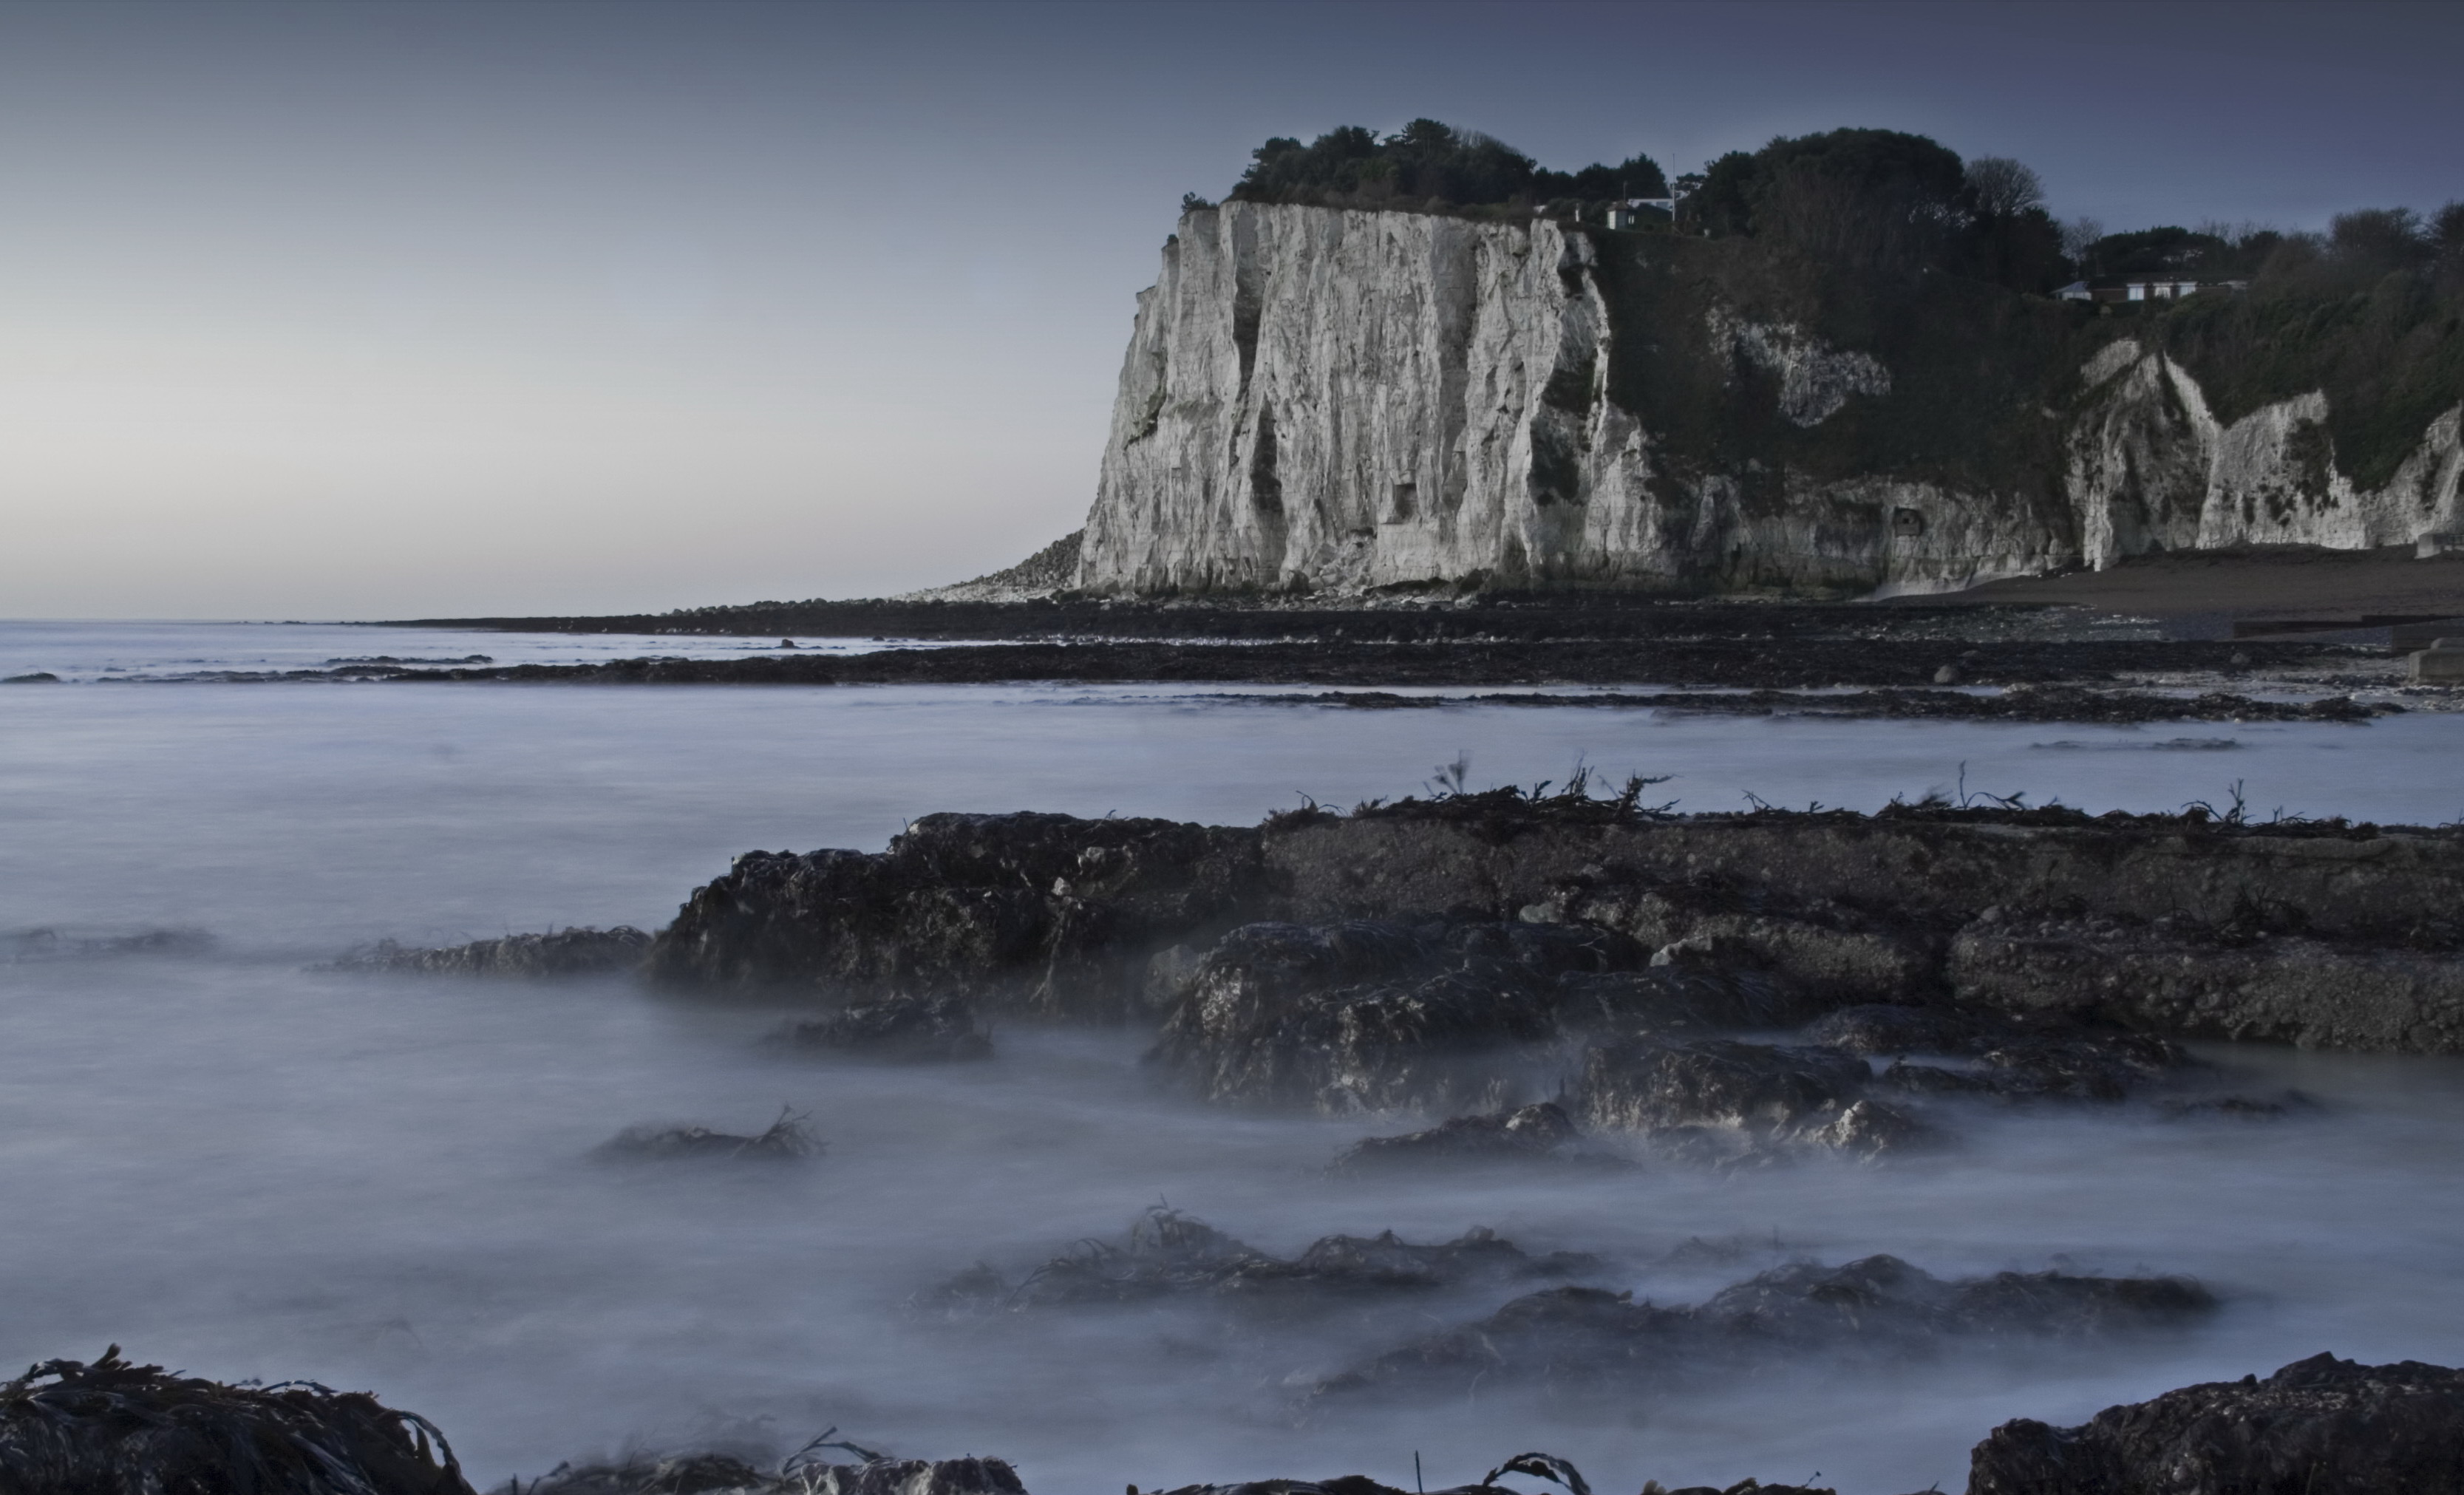 The_Cliffs_of_Dover_by_Adrian87.jpg